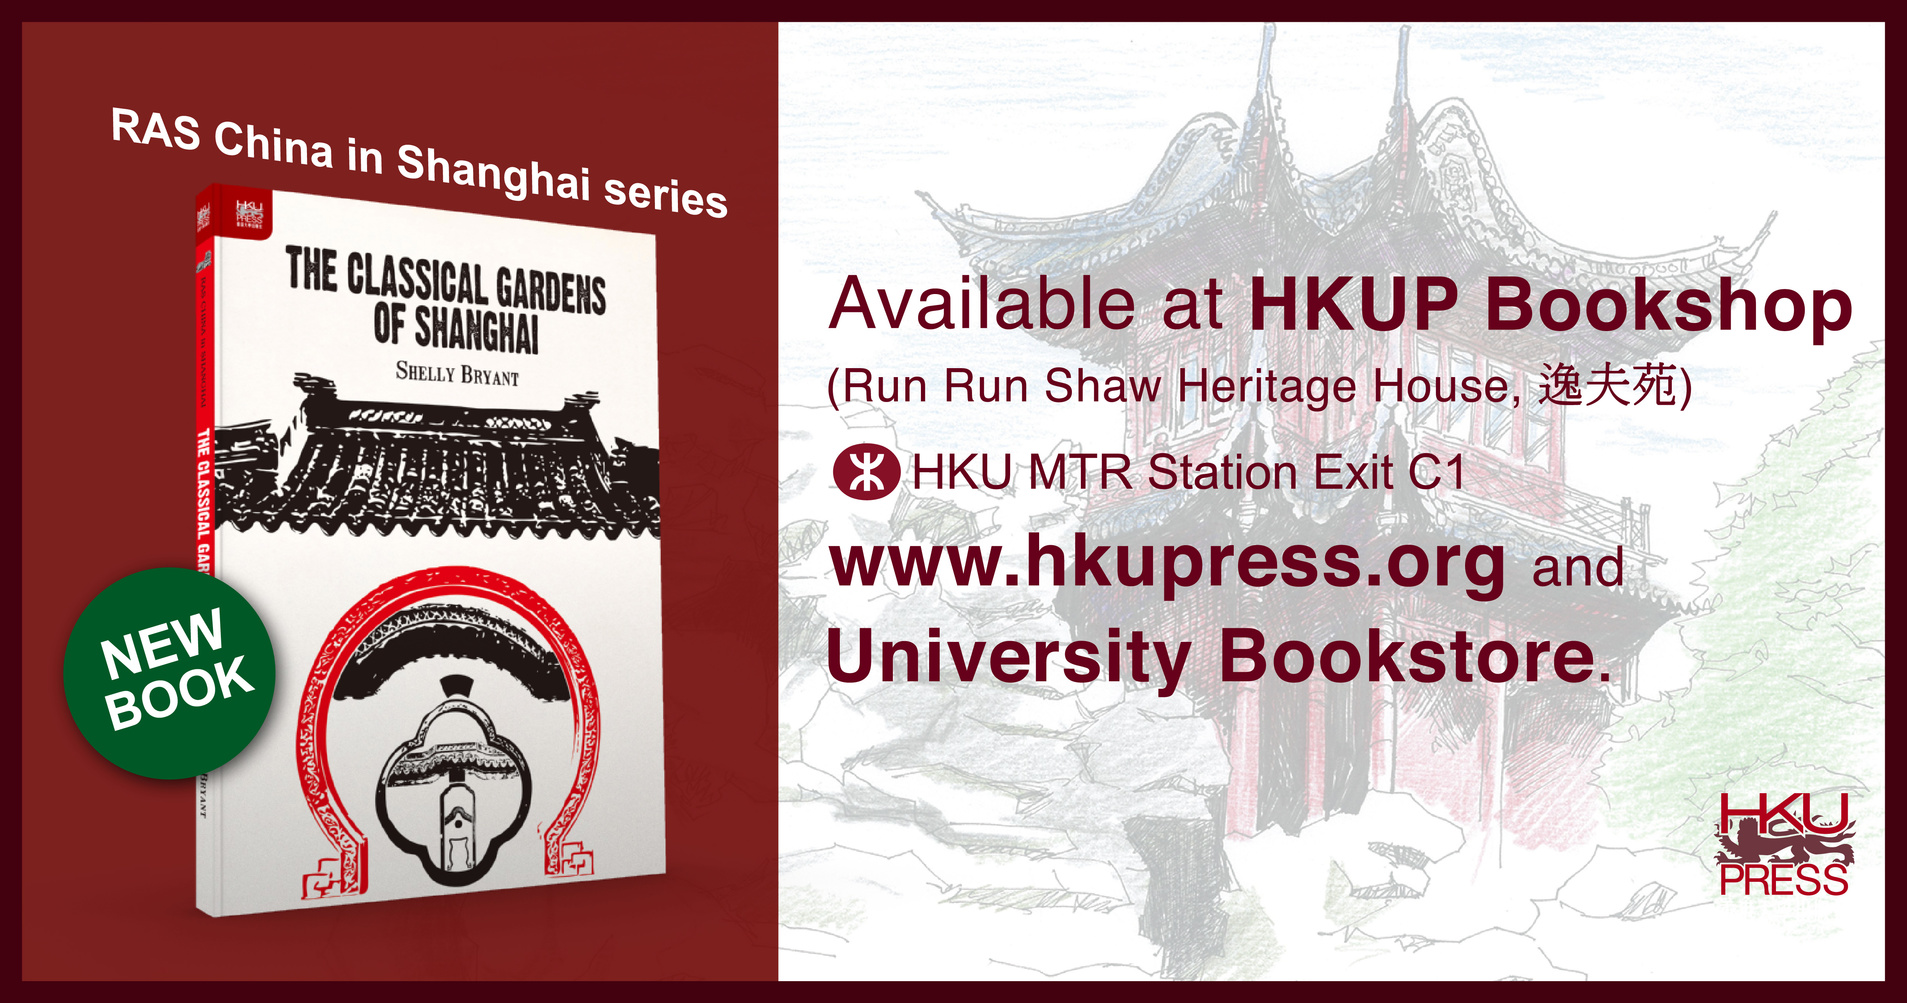 HKU Press - New Book Release: The Classical Gardens of Shanghai (RAS China in Shanghai series)